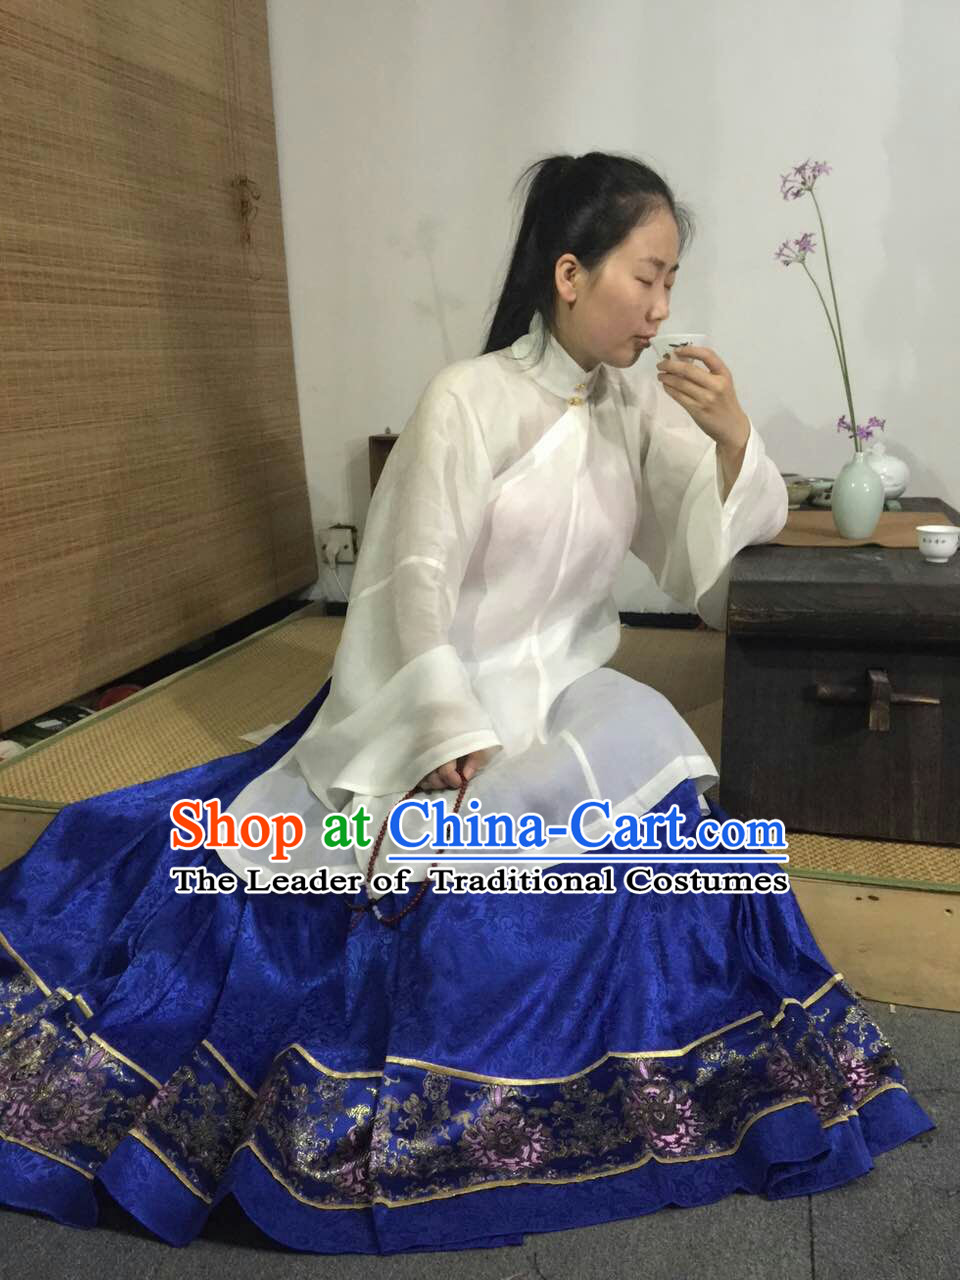 Chinese Ming Dynasty Han Fu Costumes Dresses online Designer Halloween Costume Wedding Gowns Dance Costumes Superhero Costumes Cosplay for Women